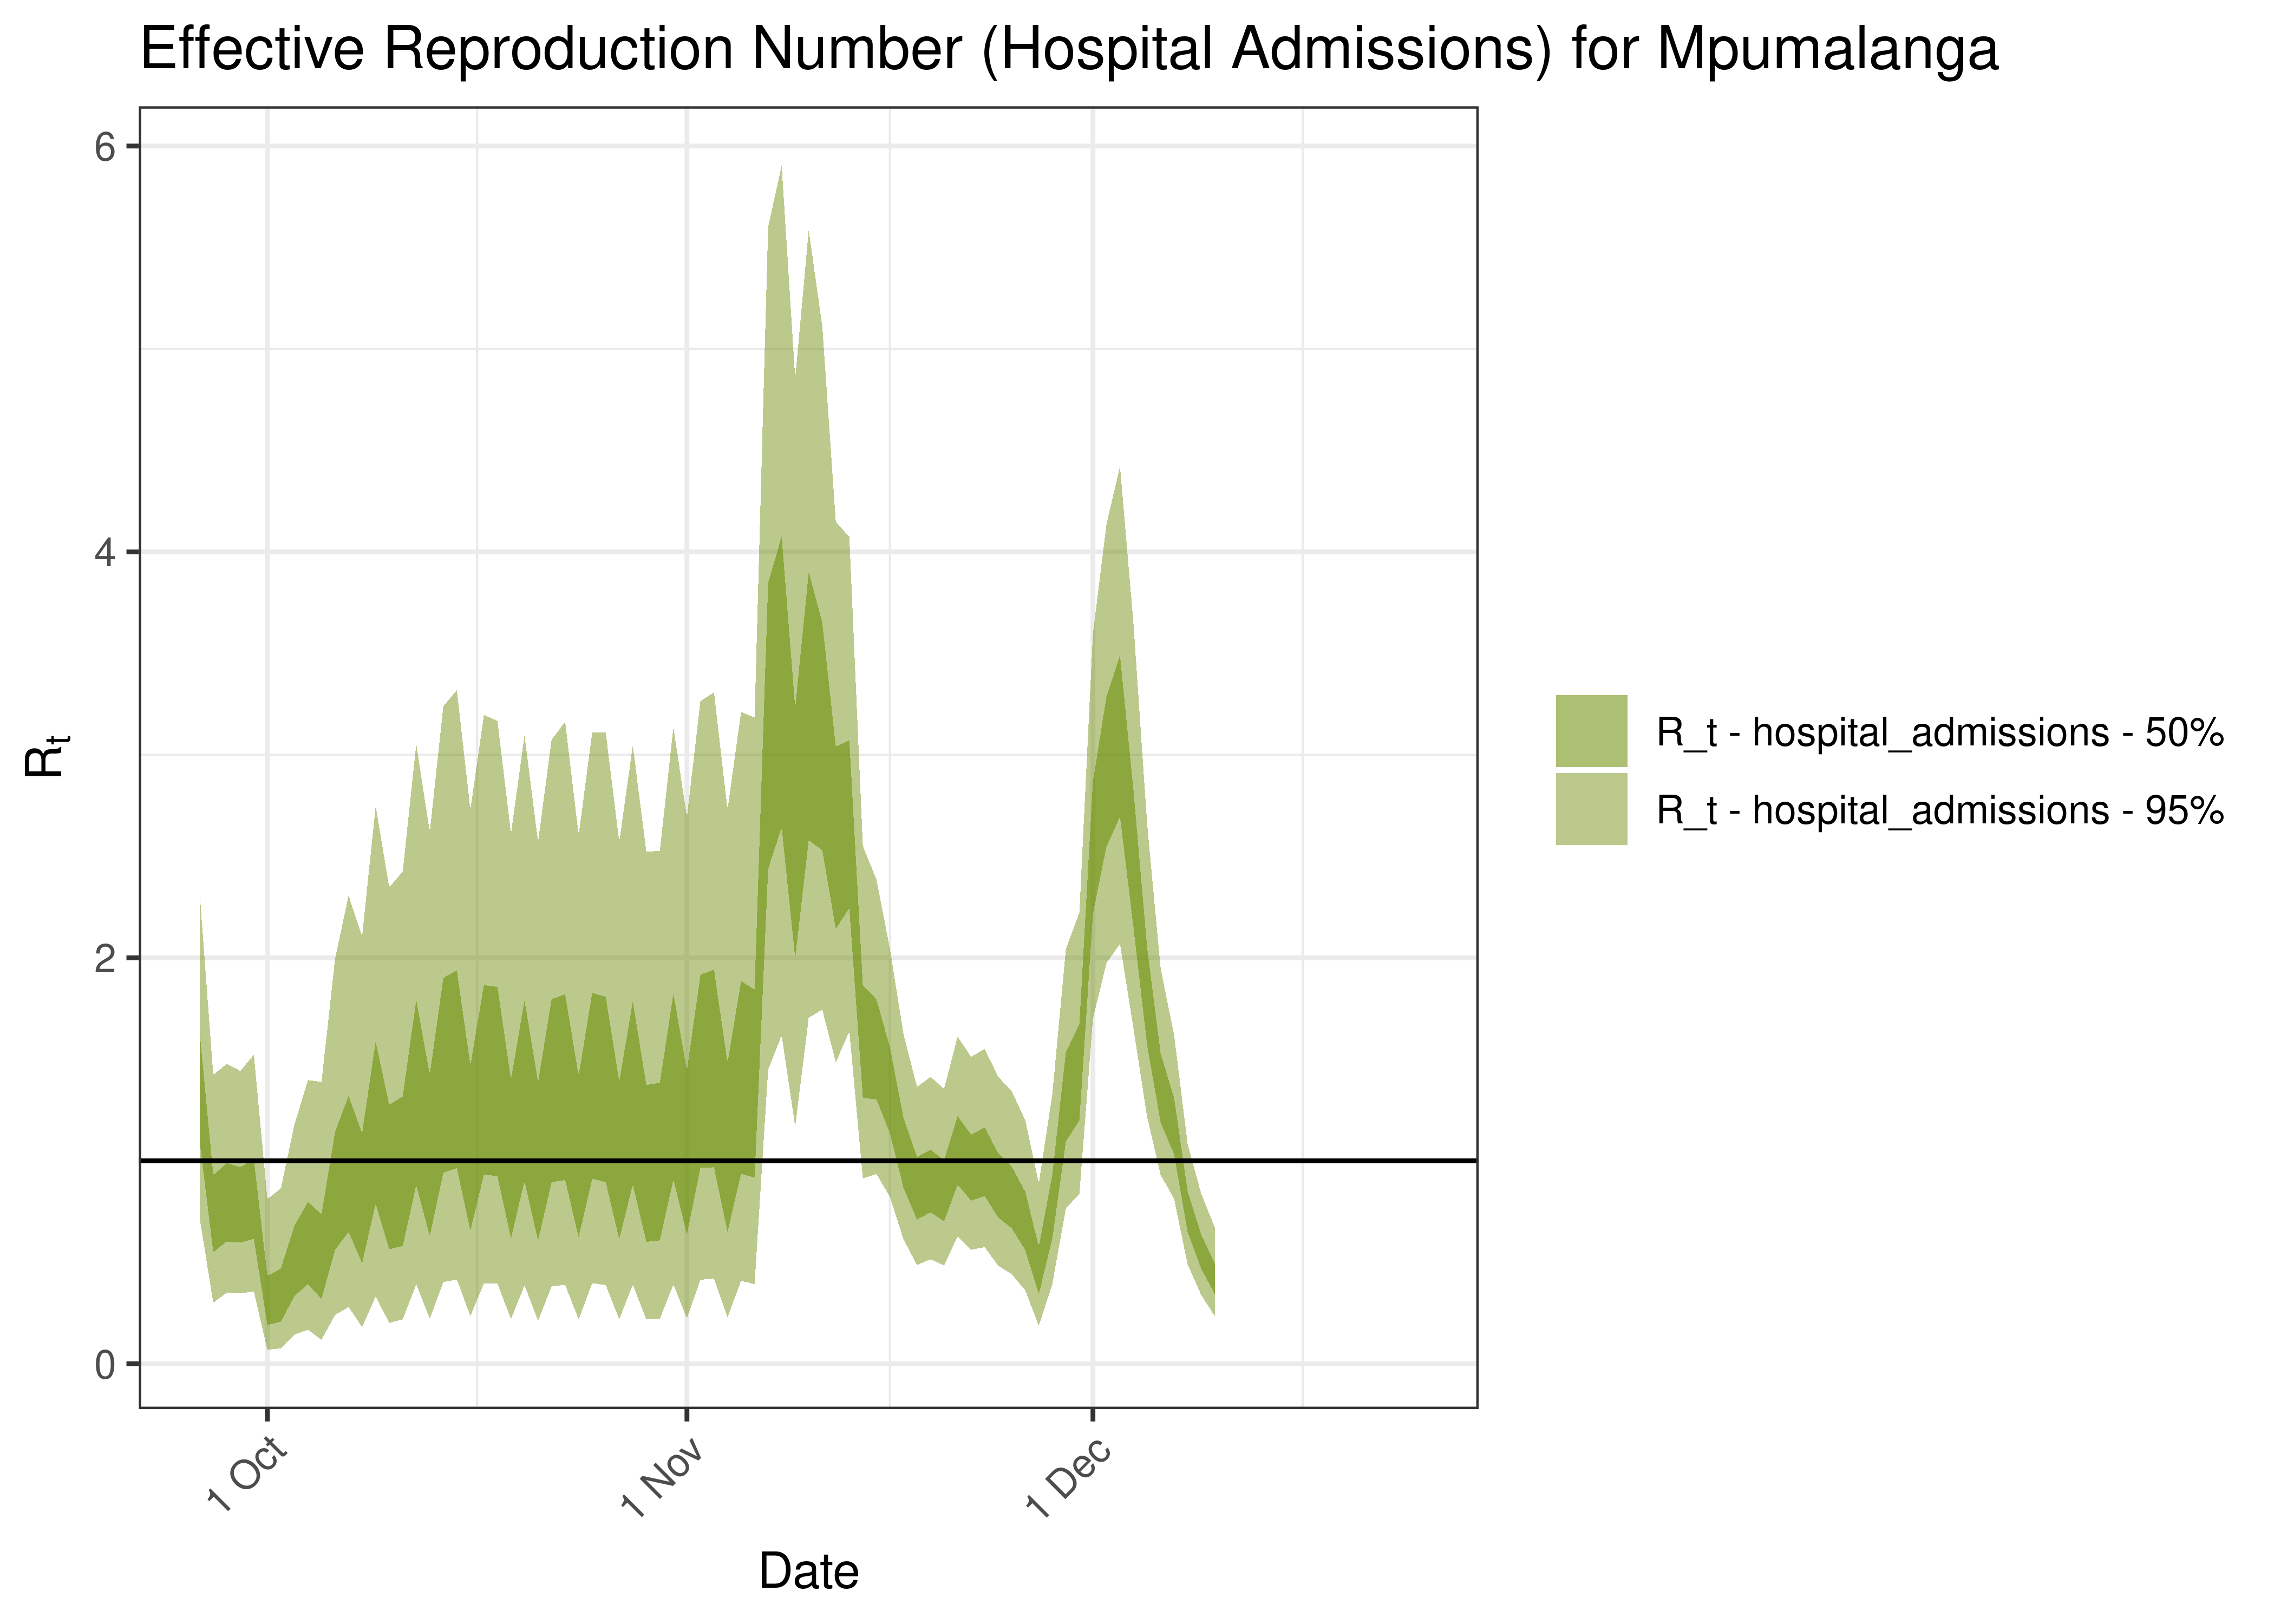 Estimated Effective Reproduction Number Based on Hospital Admissions for Mpumalanga over last 90 days